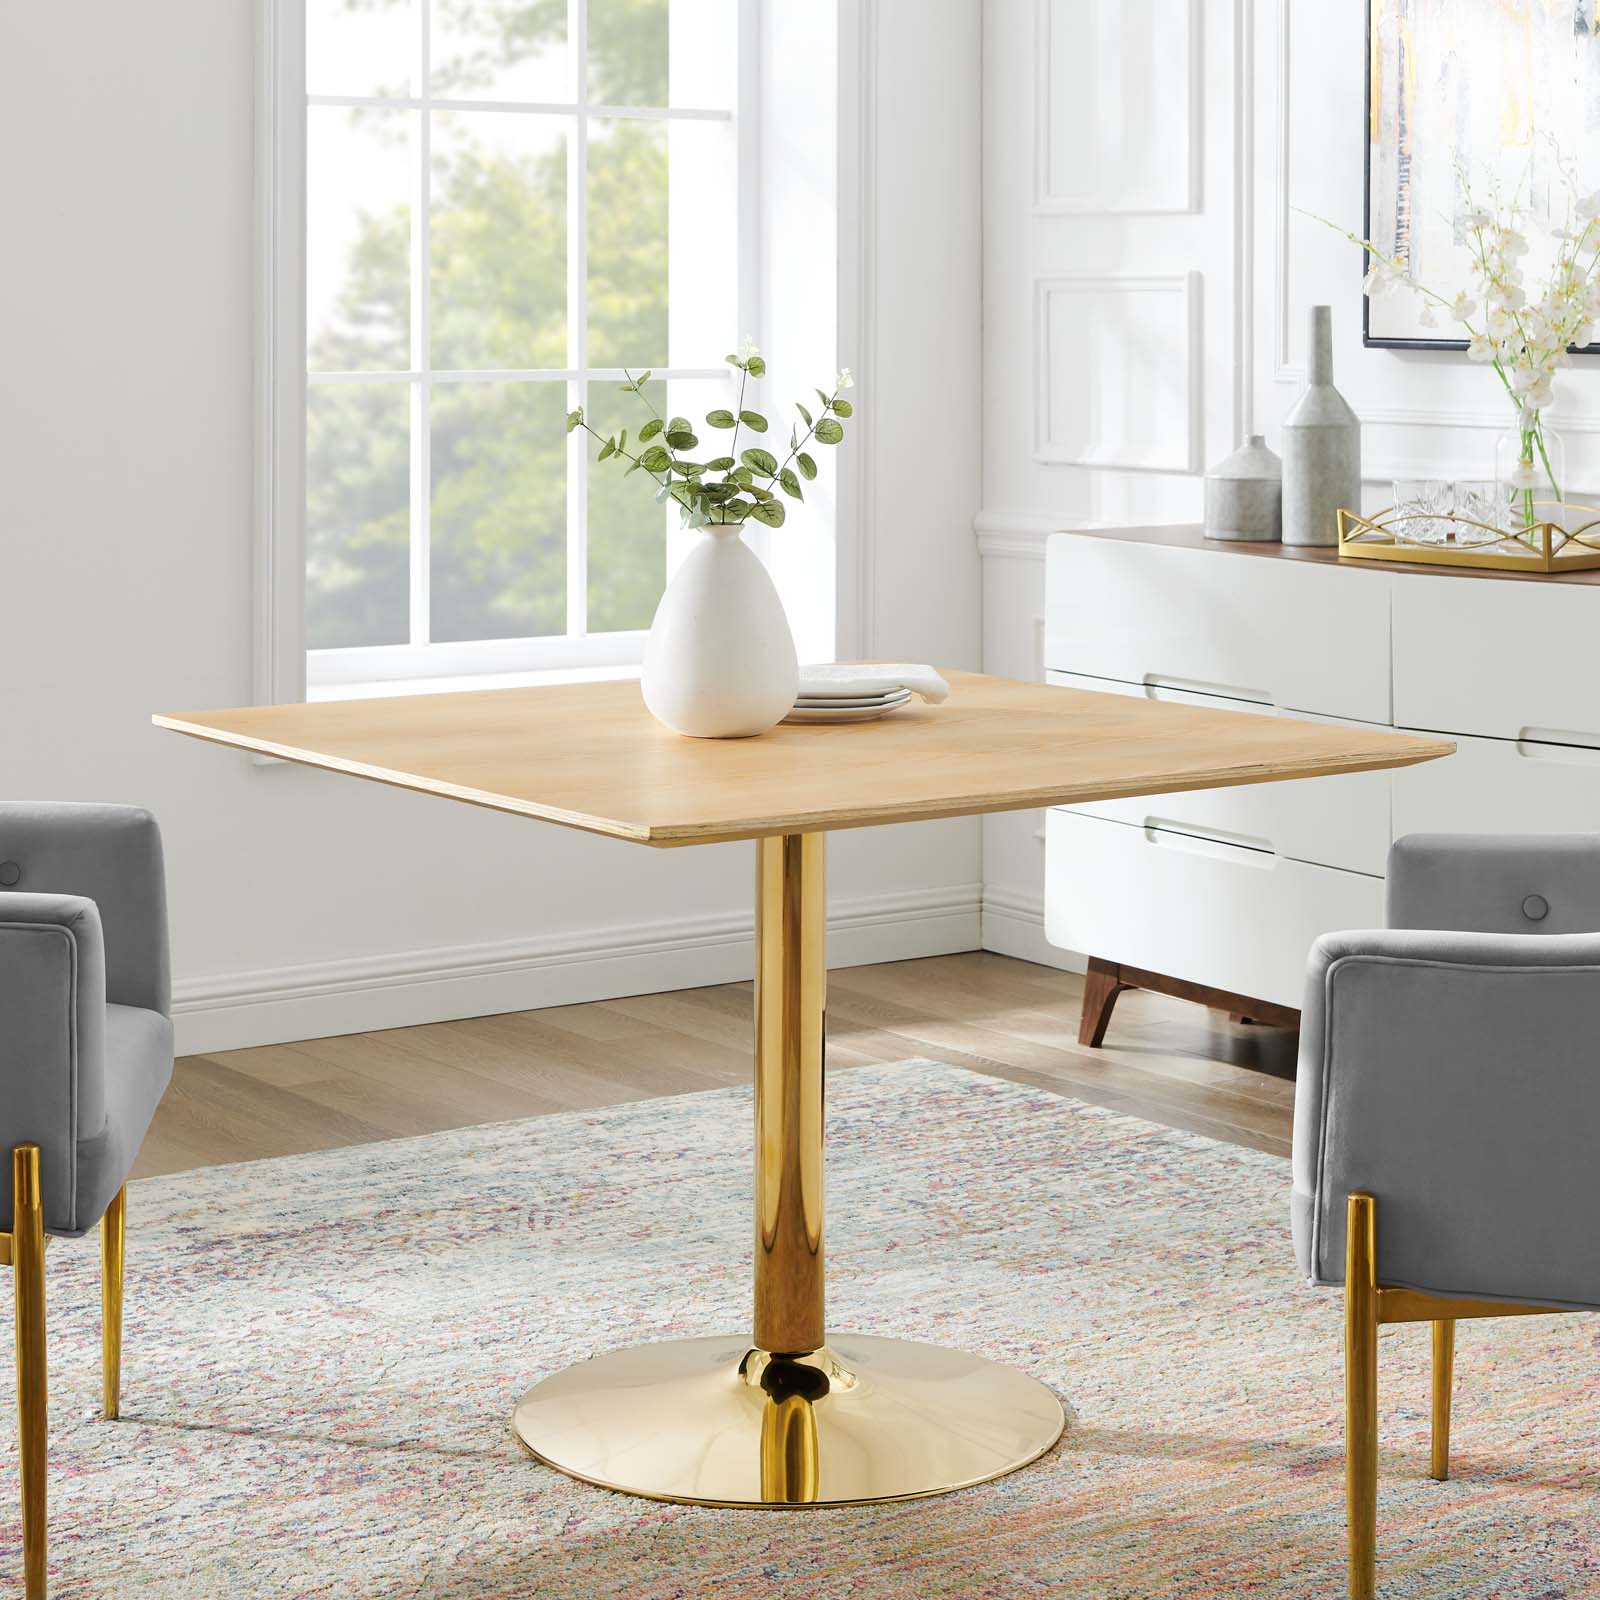 Verne 40" Square Dining Table - East Shore Modern Home Furnishings